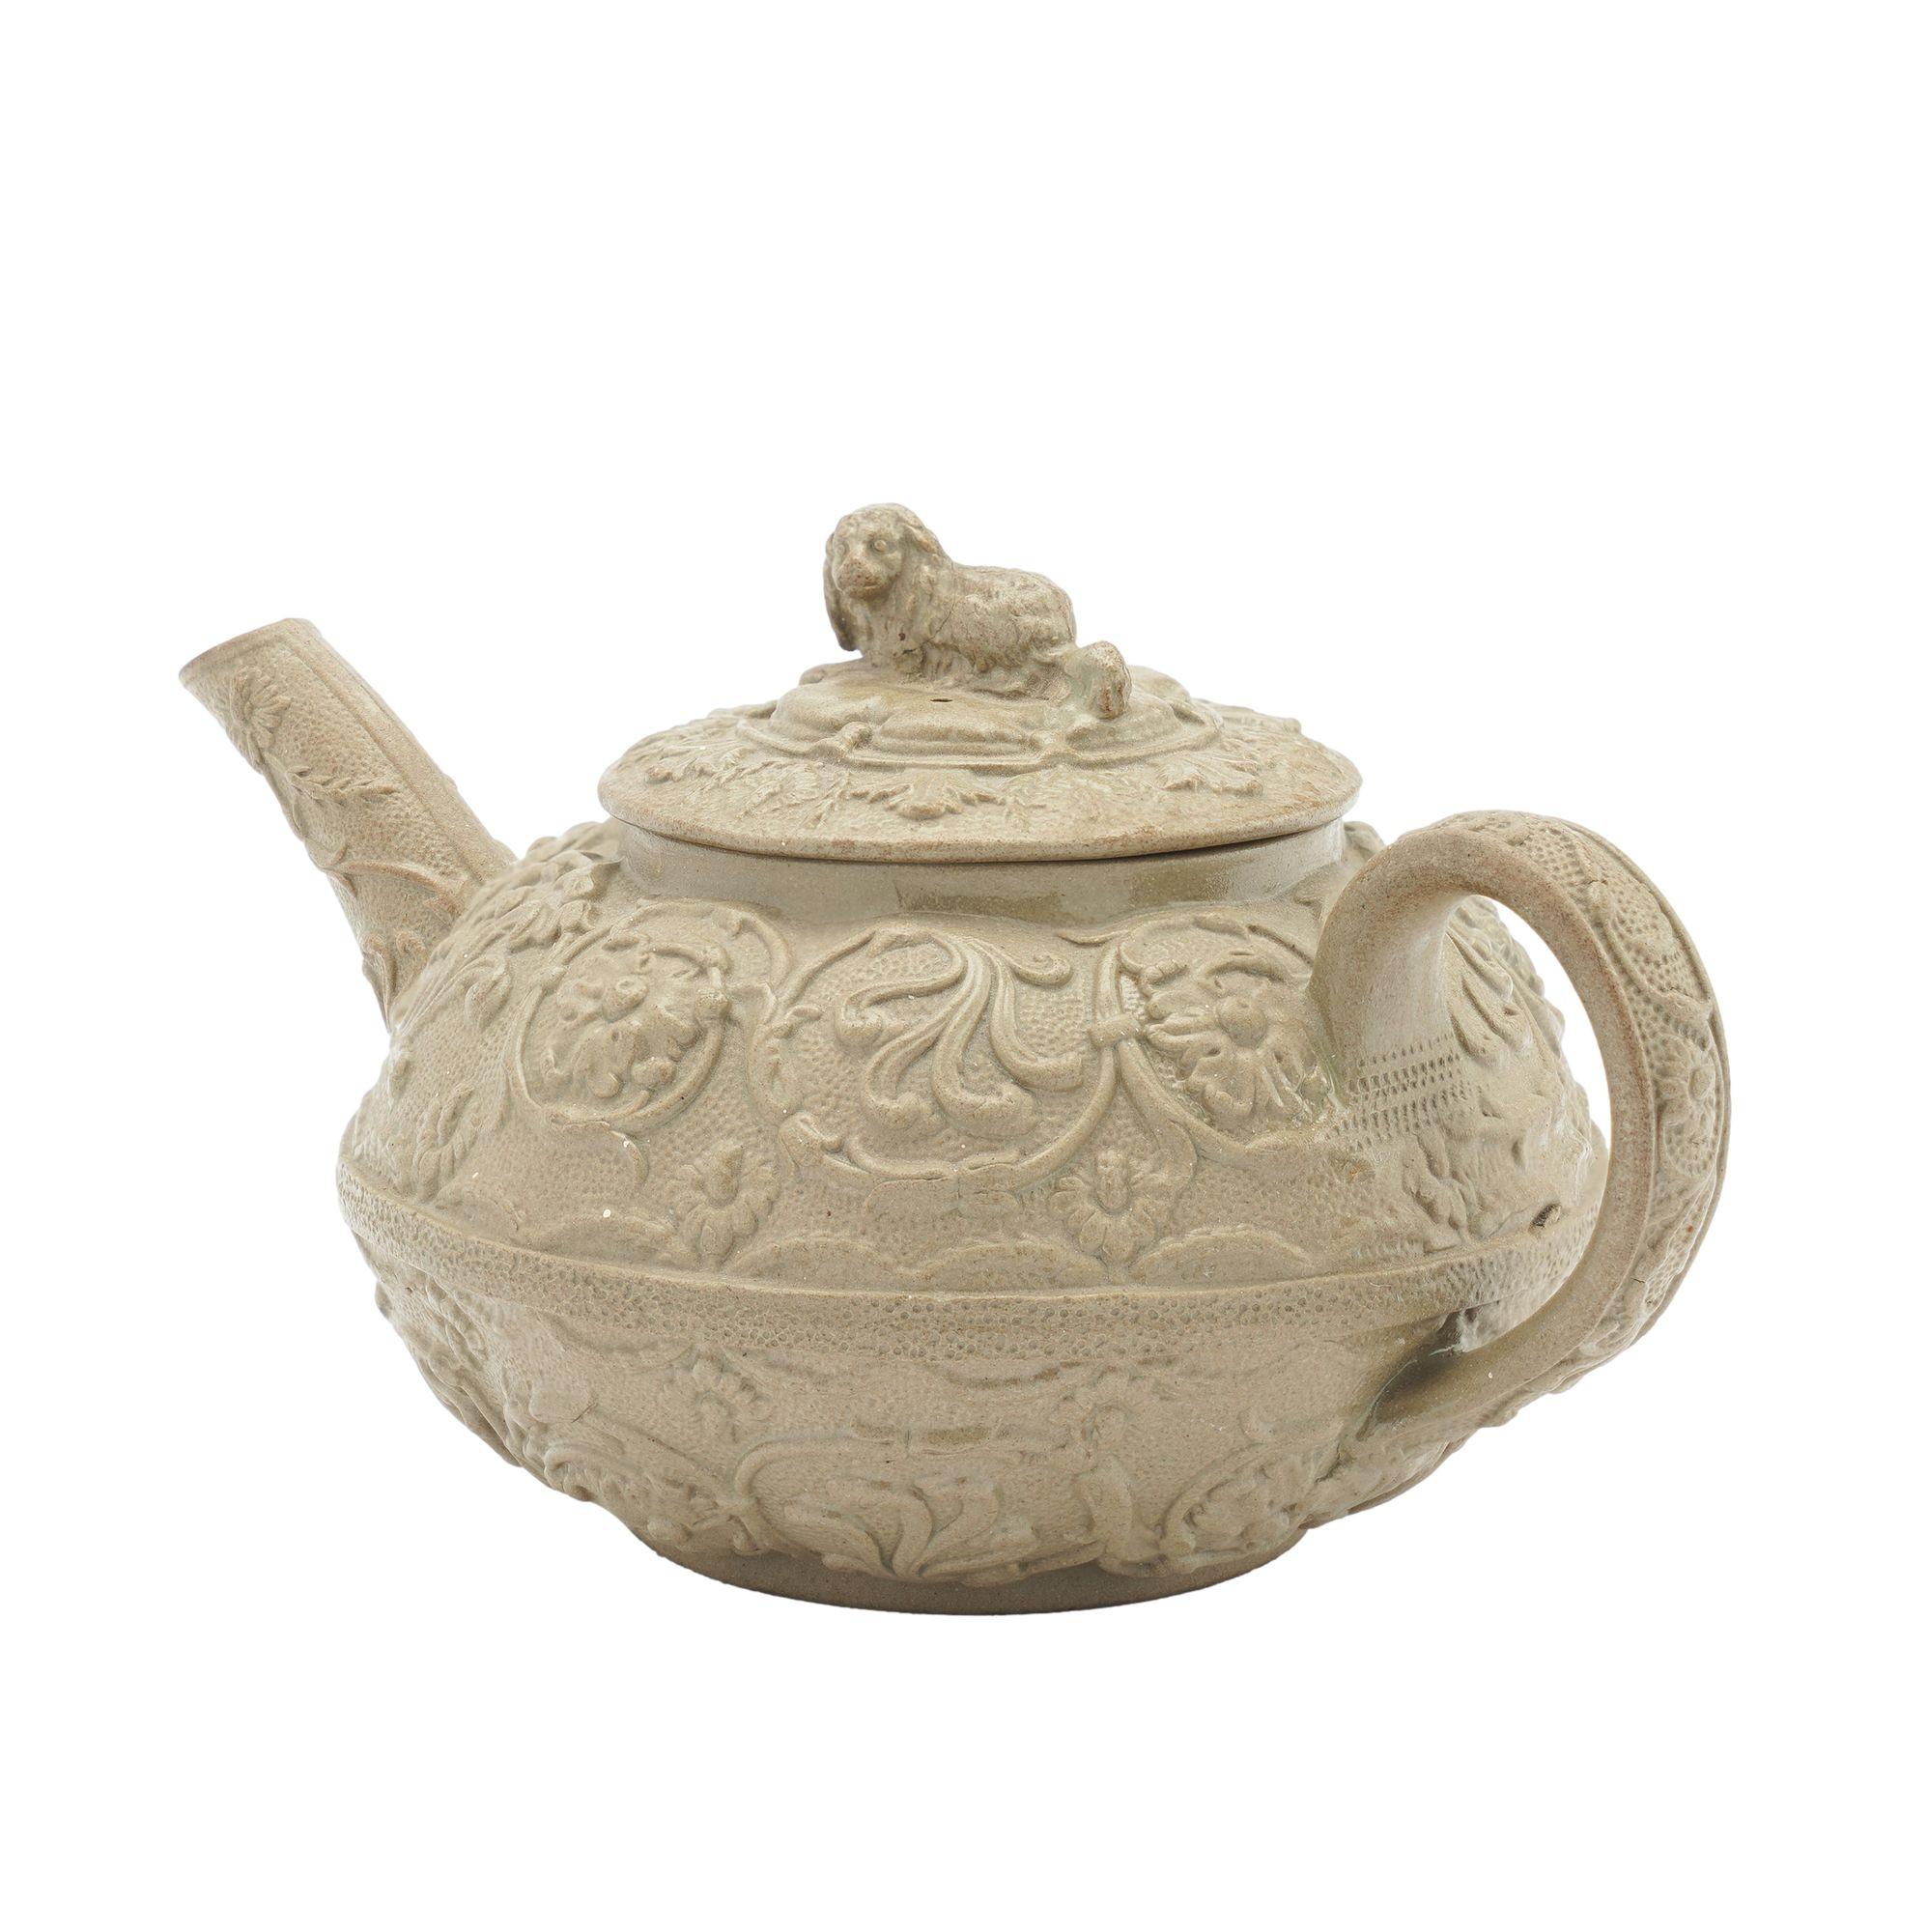 Slip cast stoneware tea pot in a putty colored smear glaze. The tea pot features a spaniel finial and heavy Renaissance scrolls of flowers on an overall dimpled ground. Cast from the Wedgwood & Bentley mold of 1775, which was discontinued after 1790